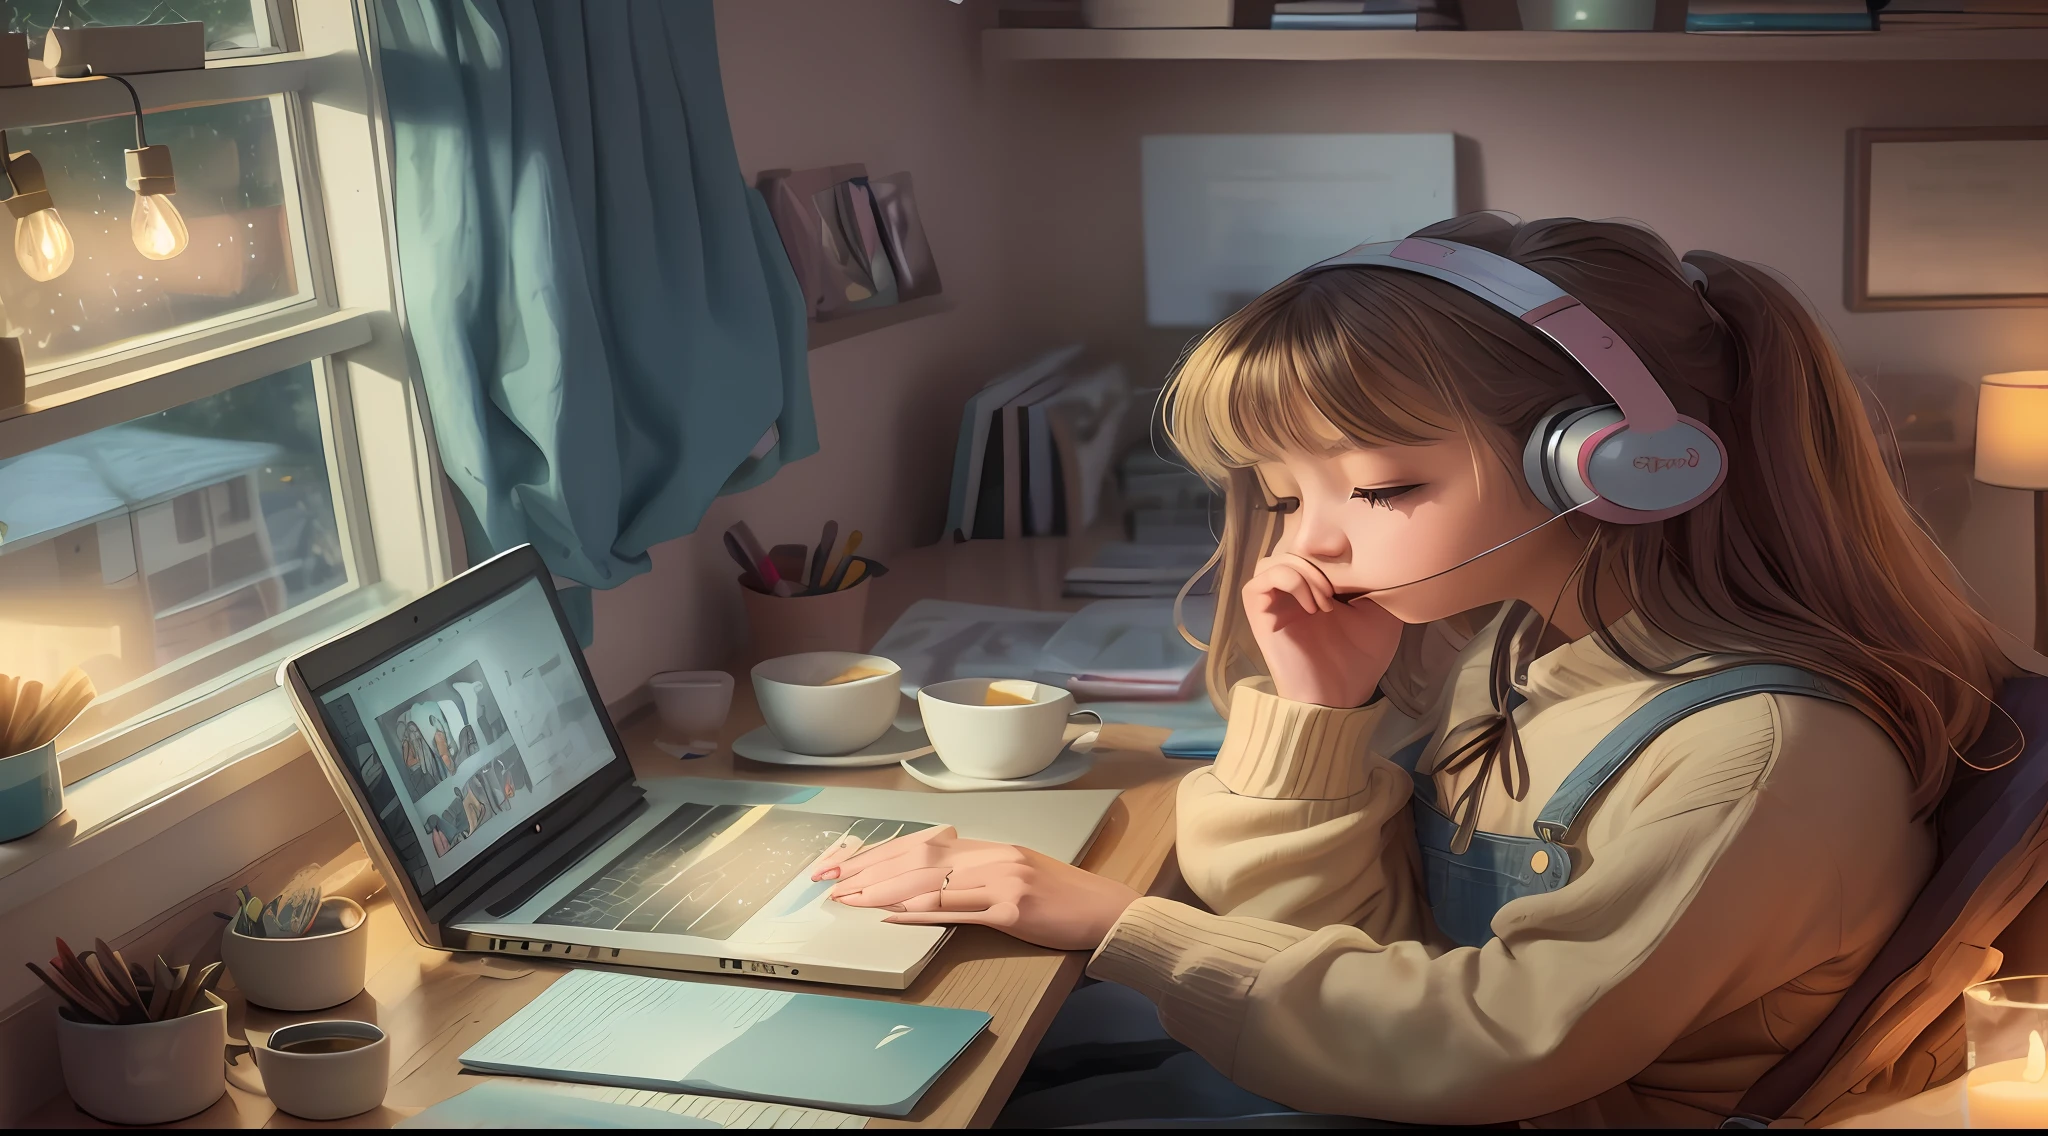 There's a blonde-haired girl, sitting at a table with a laptop, eyes open and headphones without microphone, candle lighting, painting digital adorable, bela digitl art, digitl art detalhada bonito, menina praise, lofi portrait, Art not Guweiz style, beautiful illustration digital, realistic beautiful painting, bela digitl art, digitl art, studying in the room